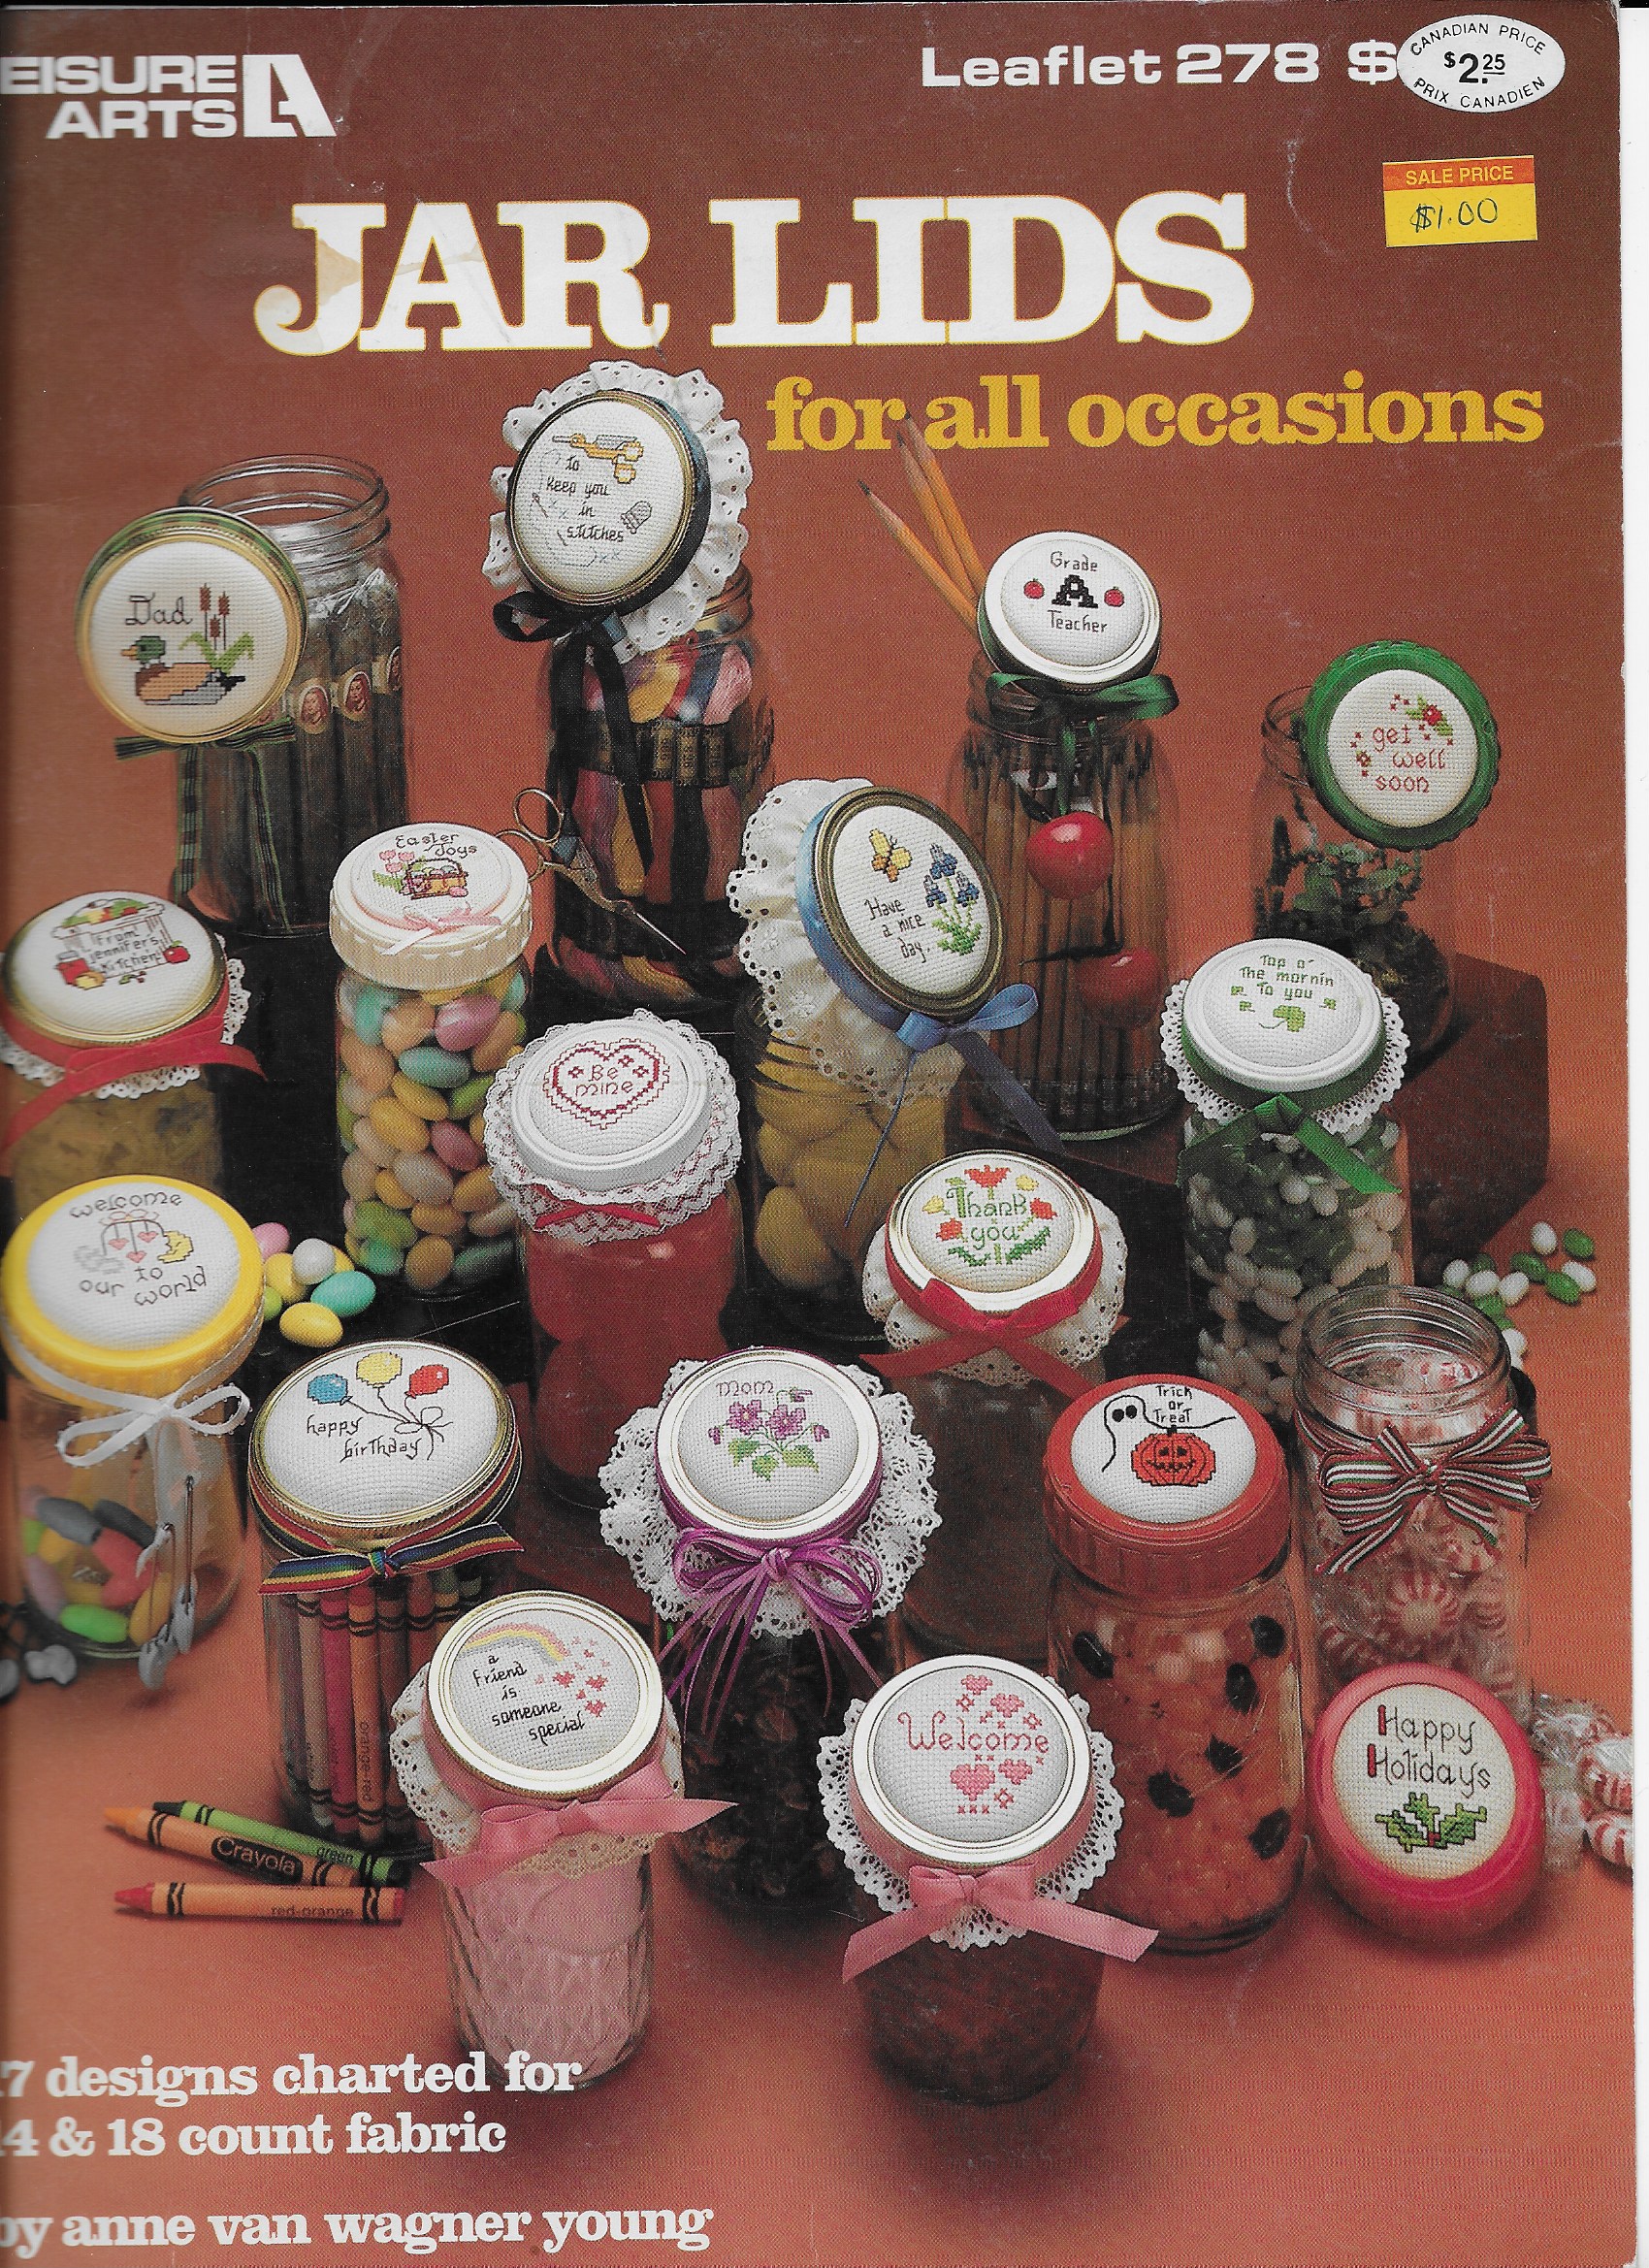 Leisure Arts 278 Jar Lids for Cross Stitch for all occasions